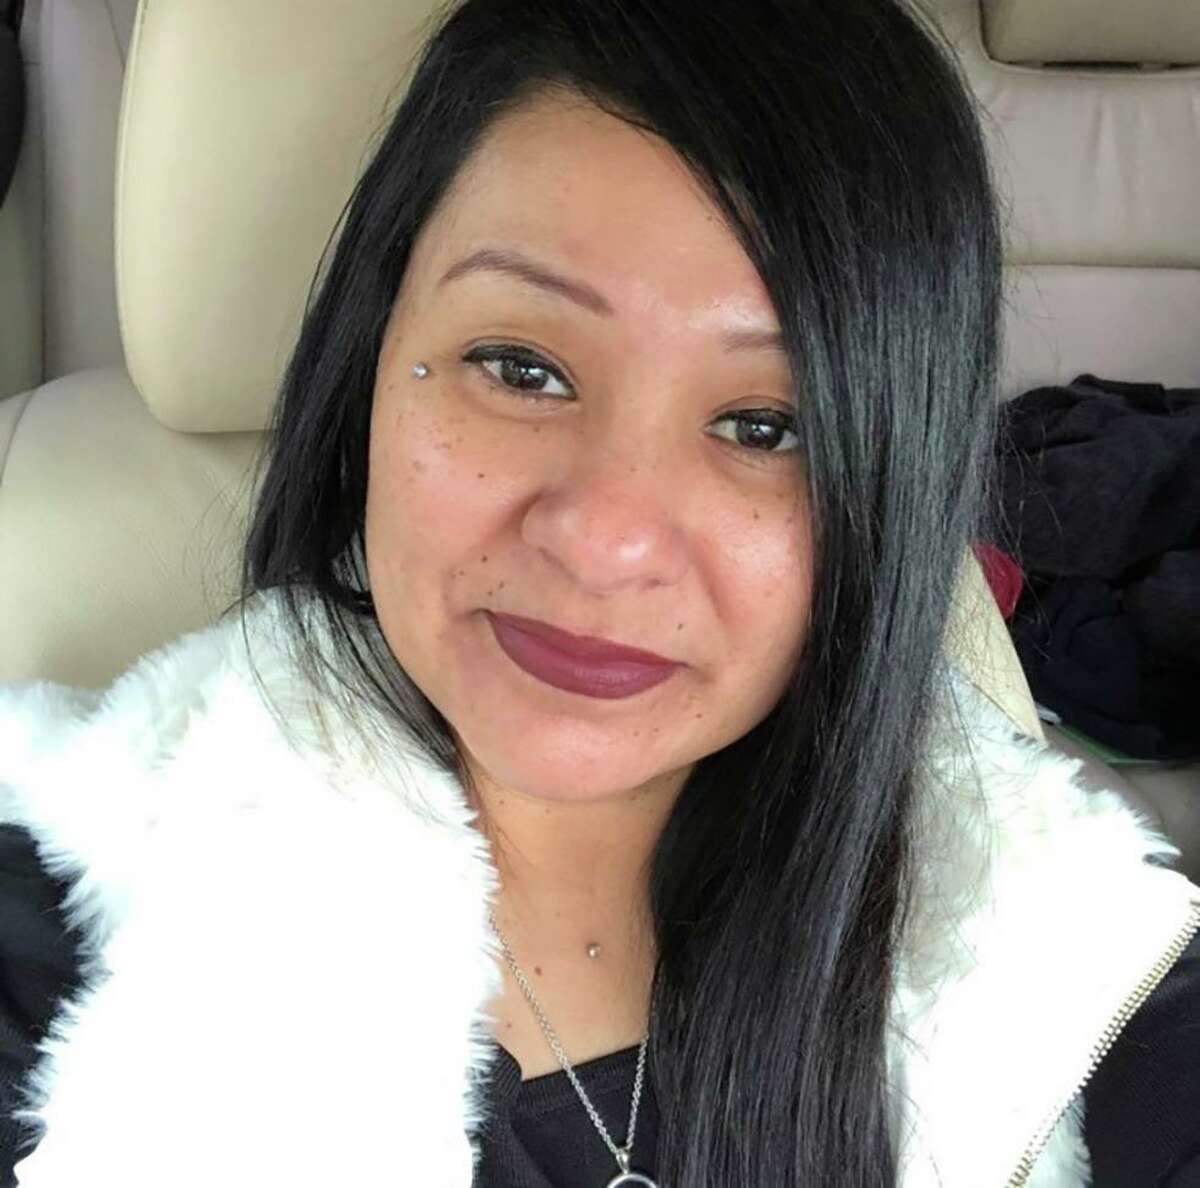 Marisela Cadena, 43, was killed in February 2020 by her ex-boyfriend, who hunted her down at the Subway where she worked. Her story was featured in a San Antonio Express-News series about family violence.